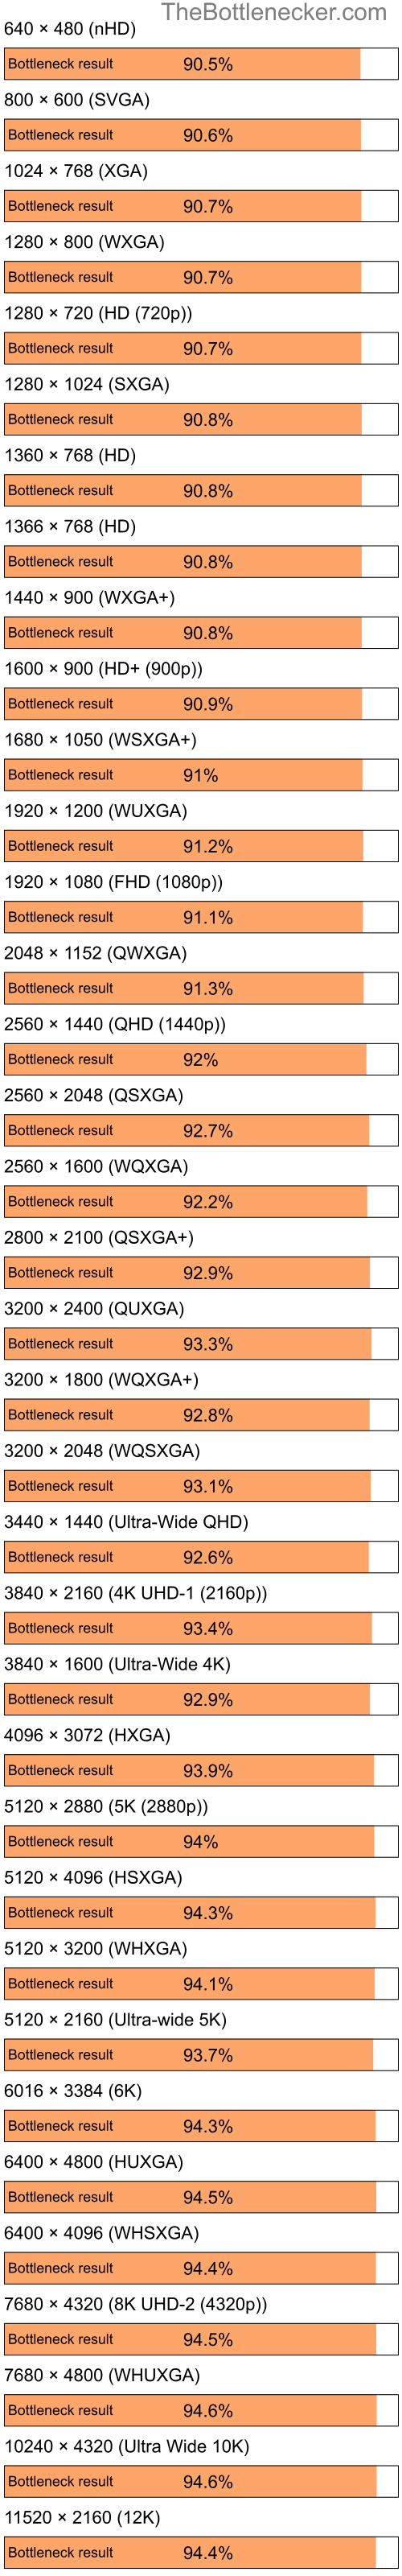 Bottleneck results by resolution for Intel Pentium 4 and AMD Radeon 9250 in General Tasks